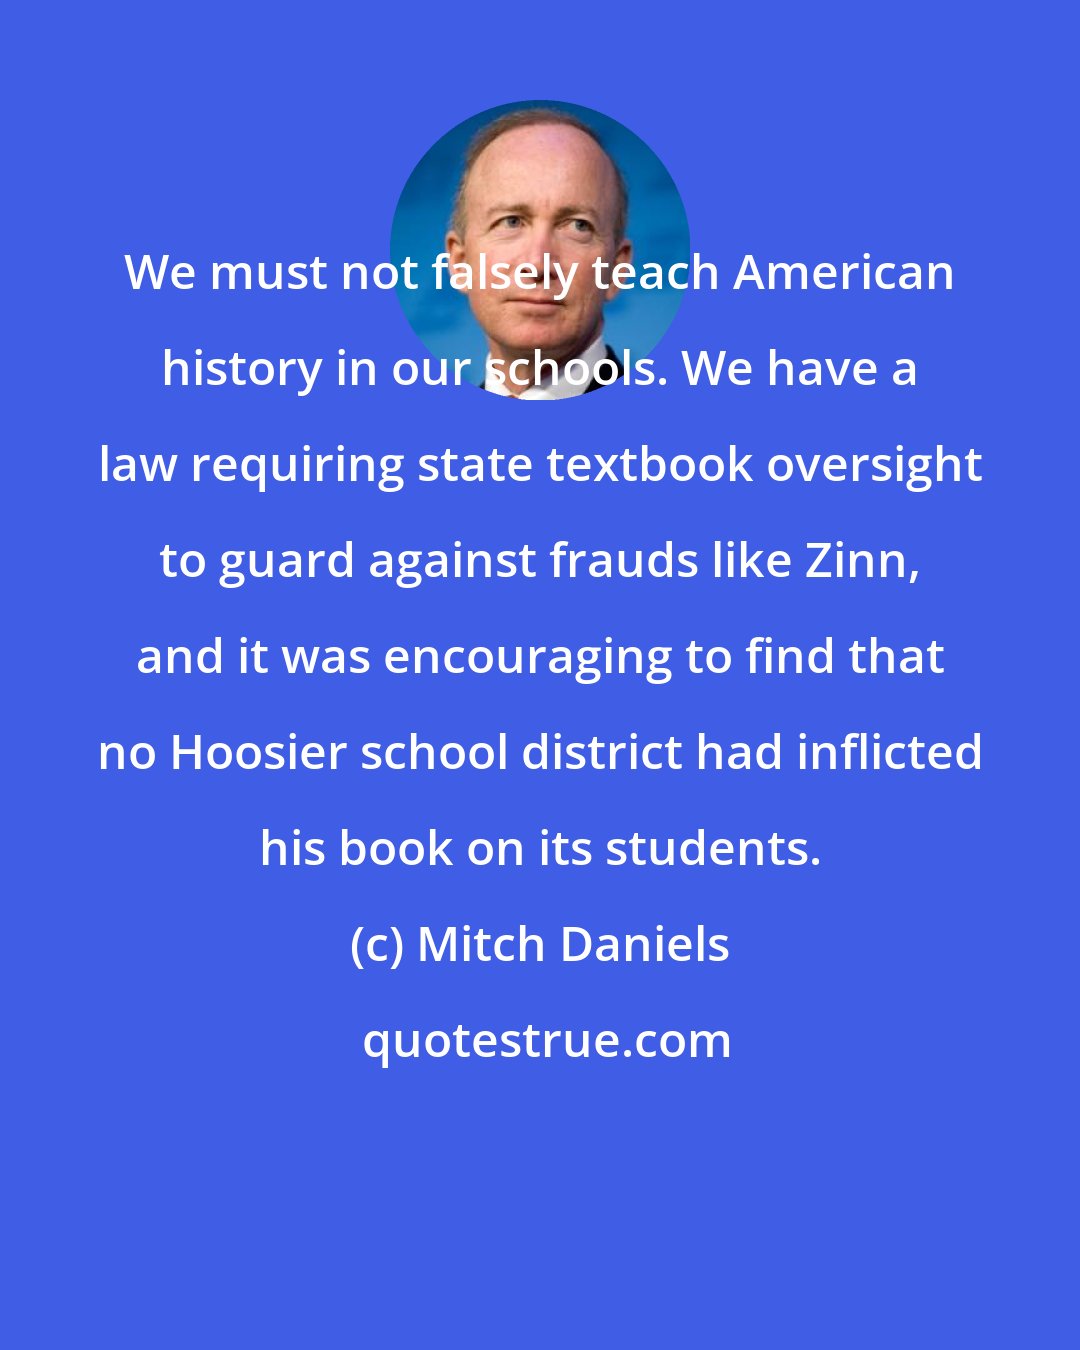 Mitch Daniels: We must not falsely teach American history in our schools. We have a law requiring state textbook oversight to guard against frauds like Zinn, and it was encouraging to find that no Hoosier school district had inflicted his book on its students.